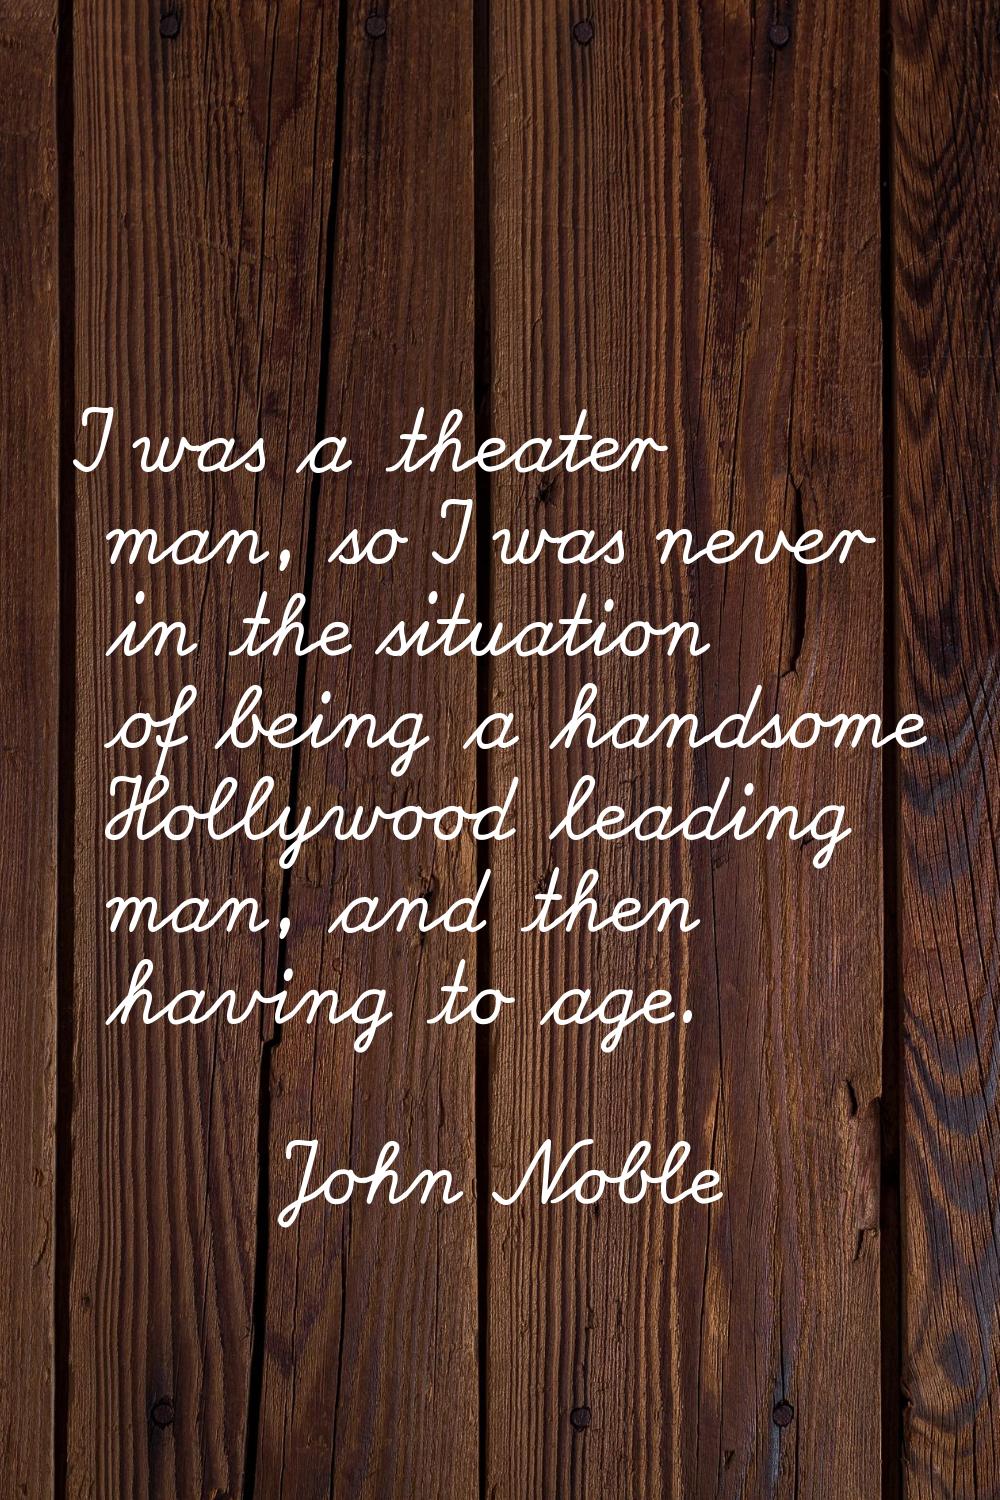 I was a theater man, so I was never in the situation of being a handsome Hollywood leading man, and